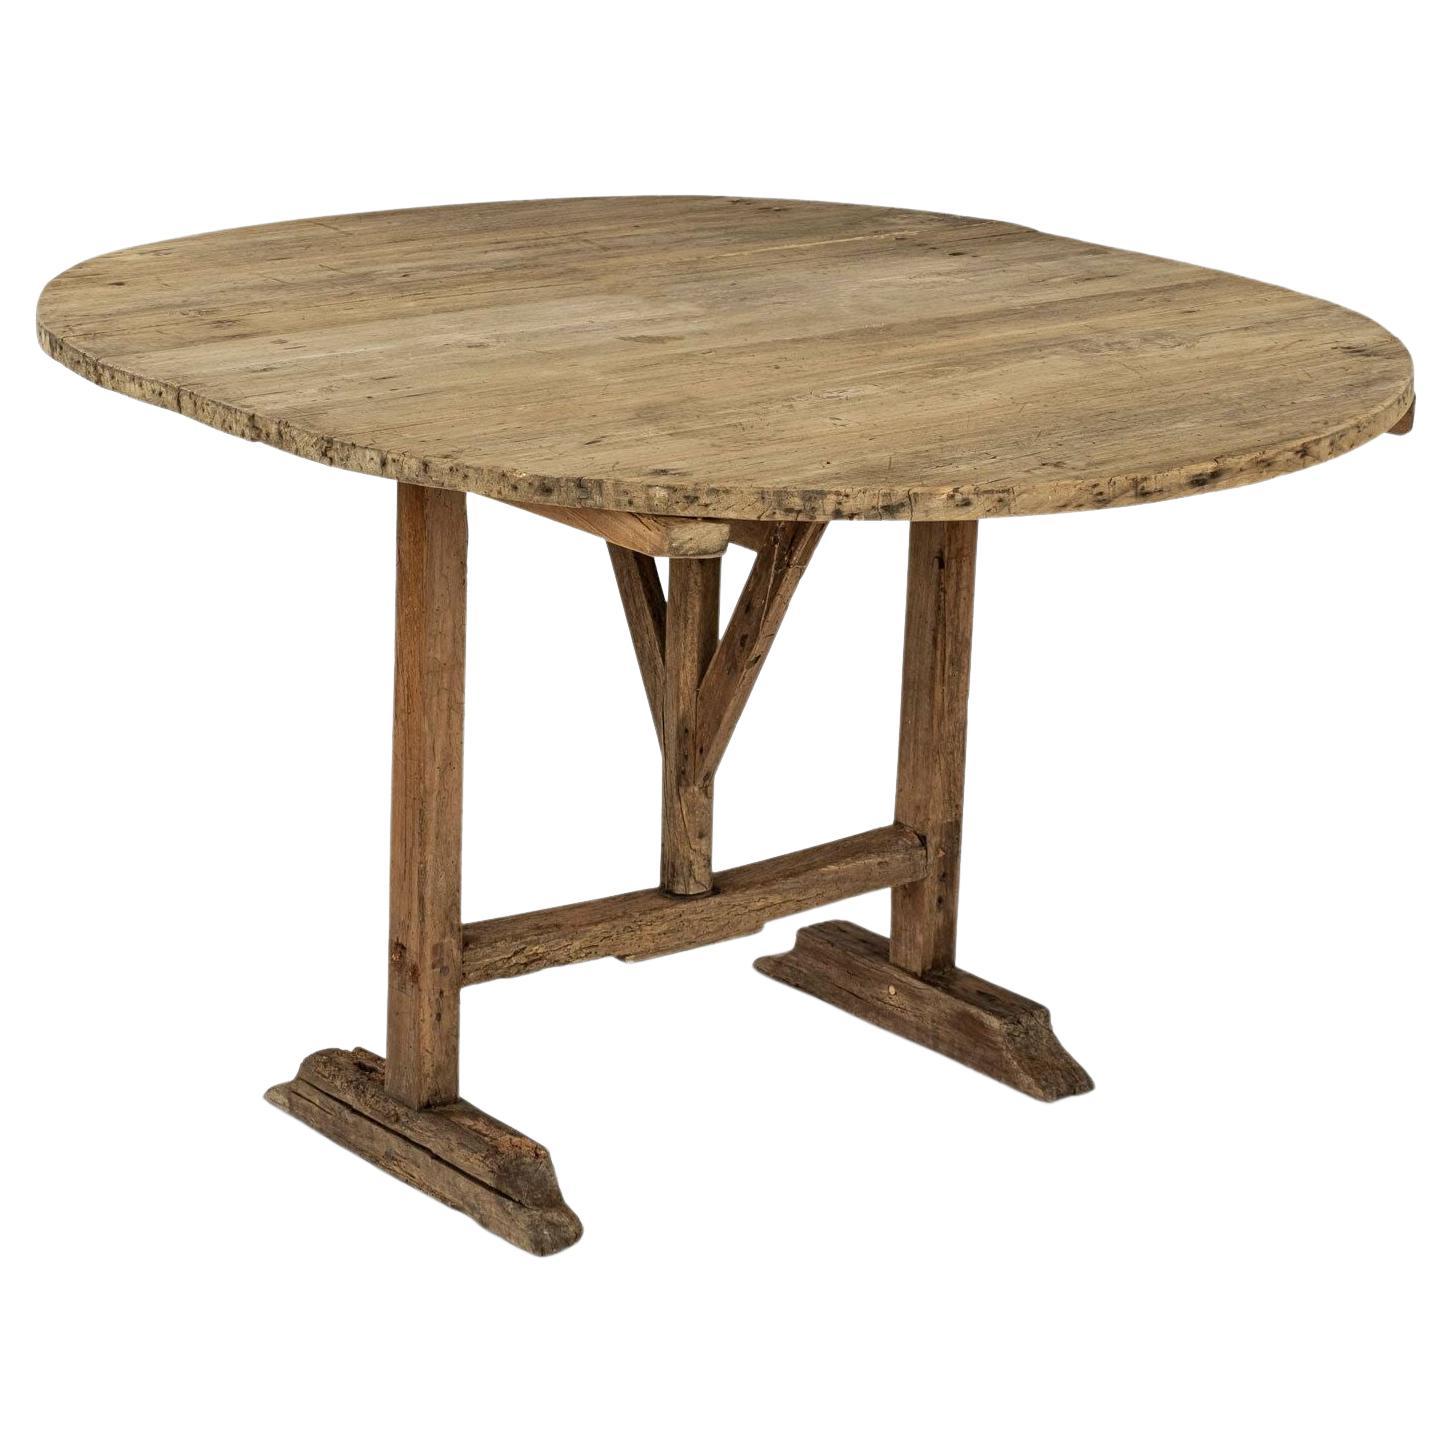 Rustic Sun-Bleached Early Oval-Shape Tilt-Top Table For Sale